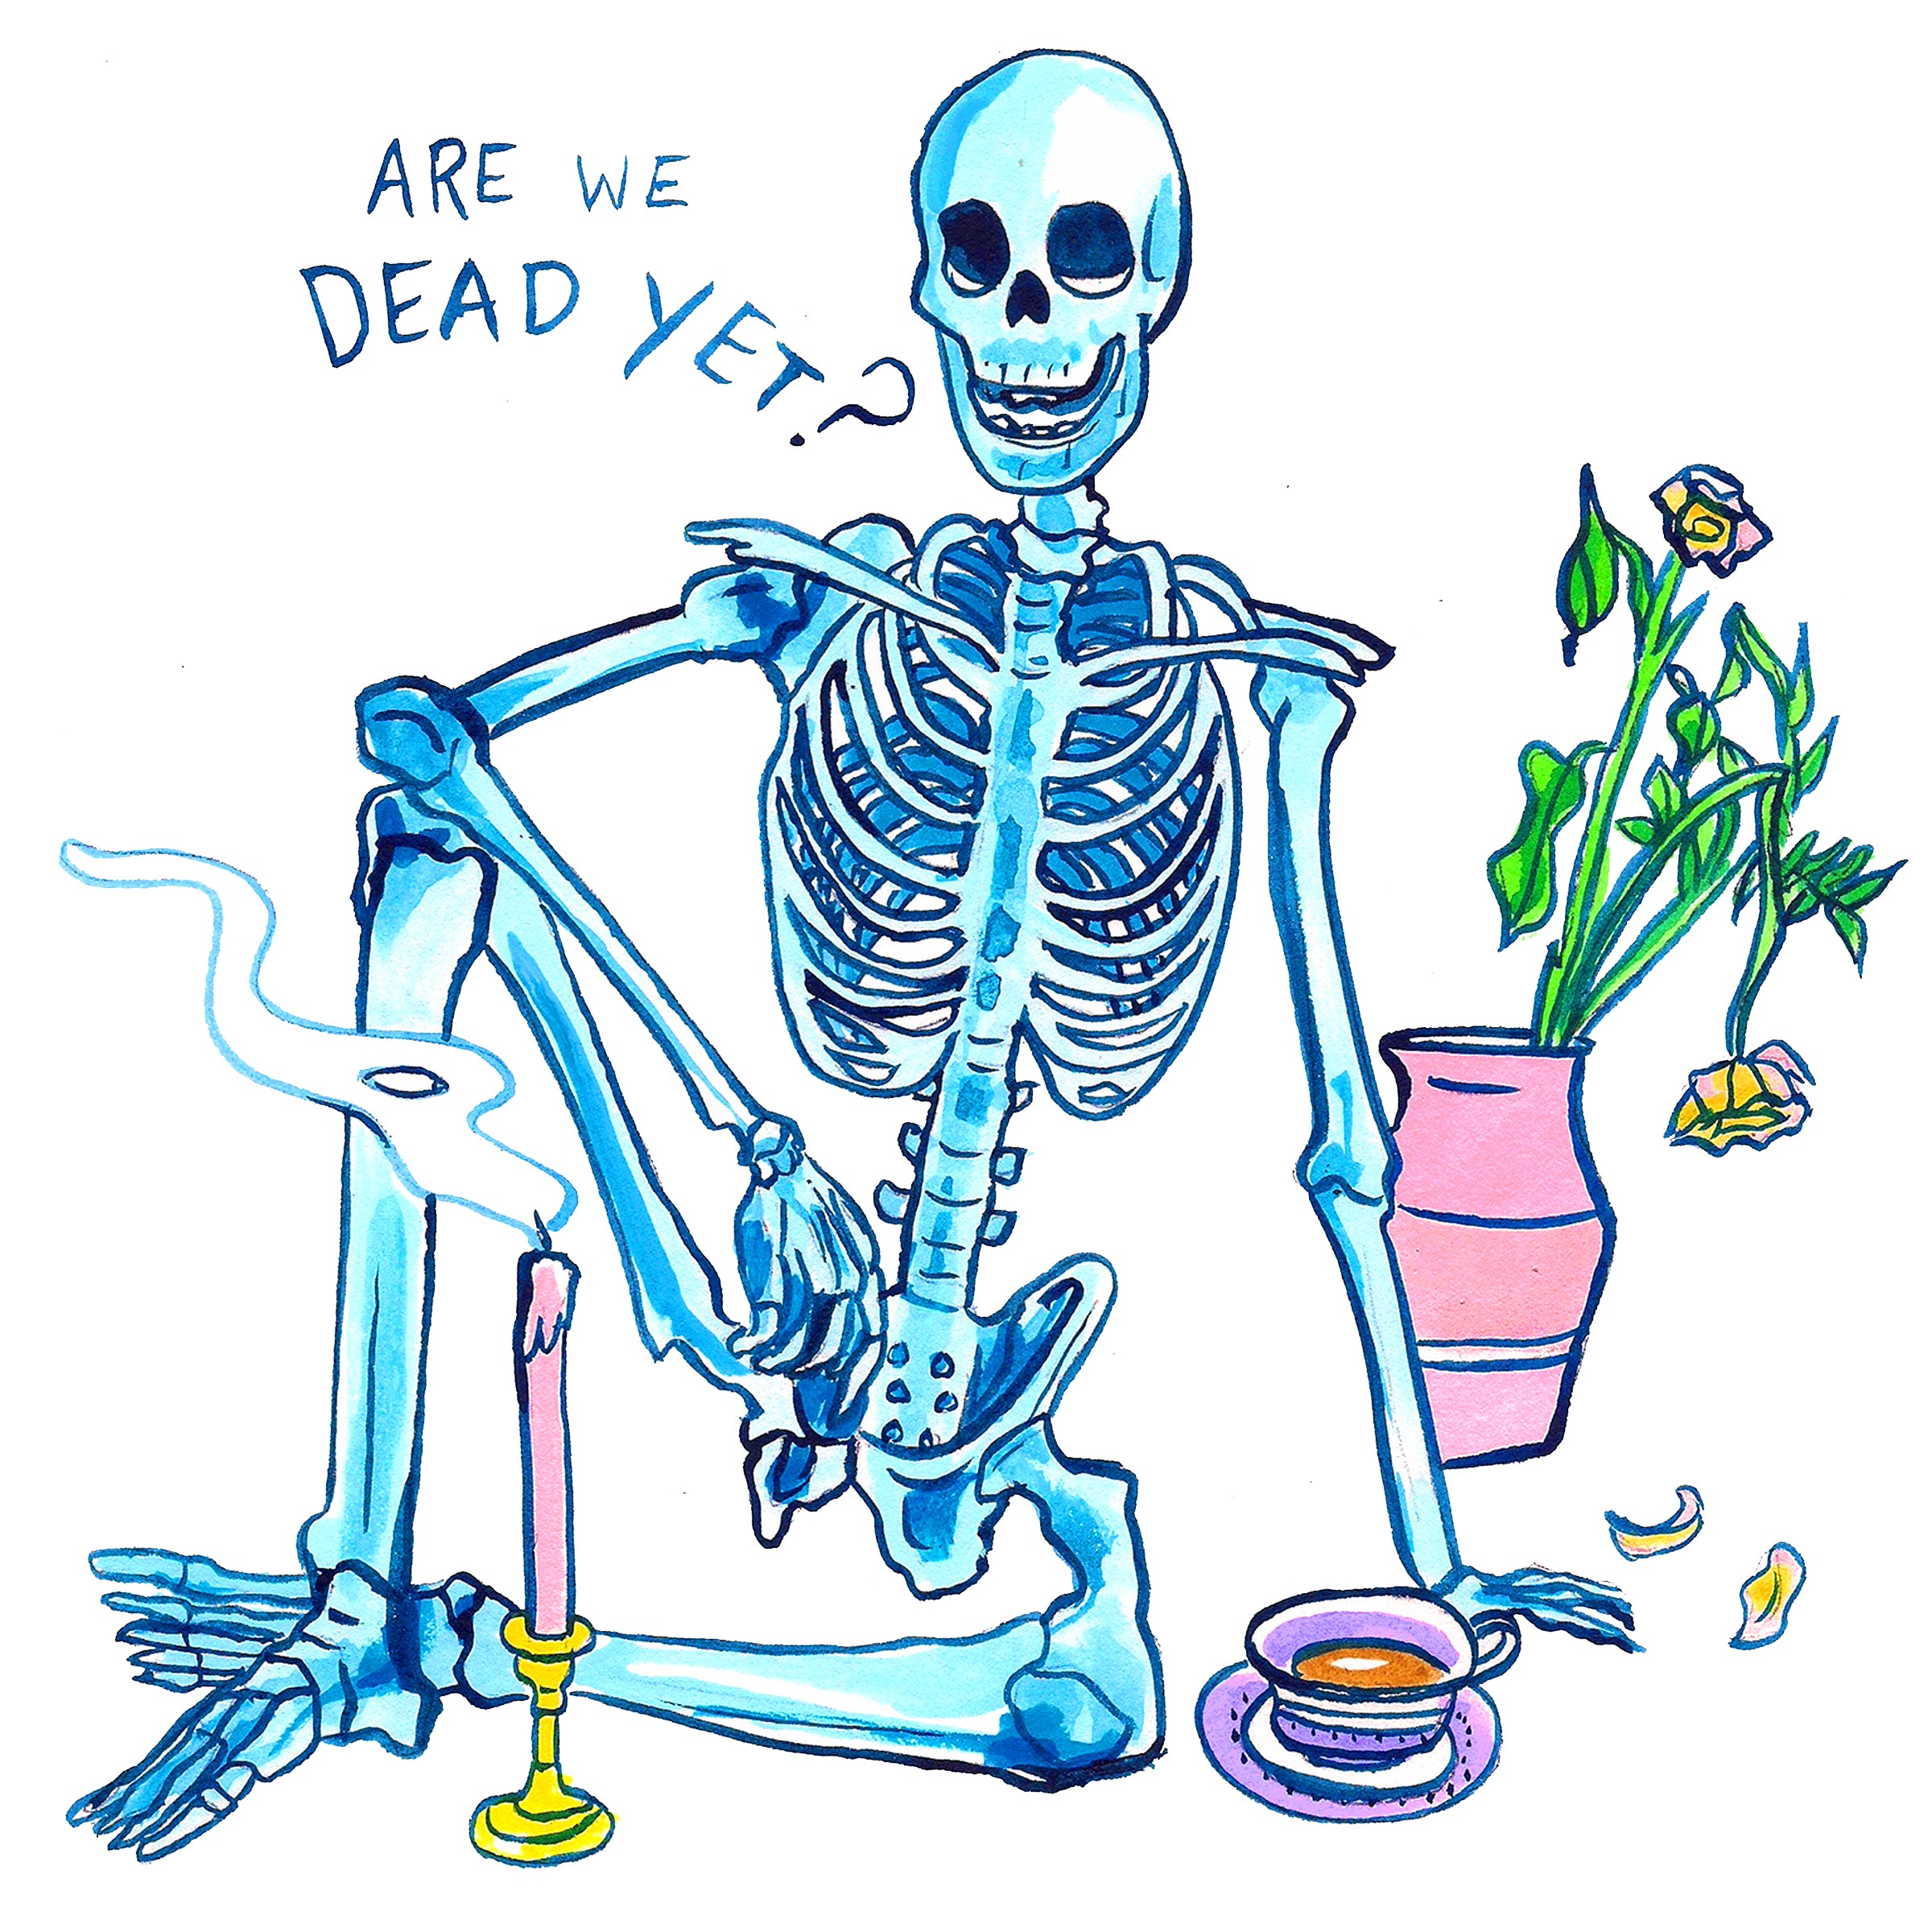 ARE WE DEAD YET?